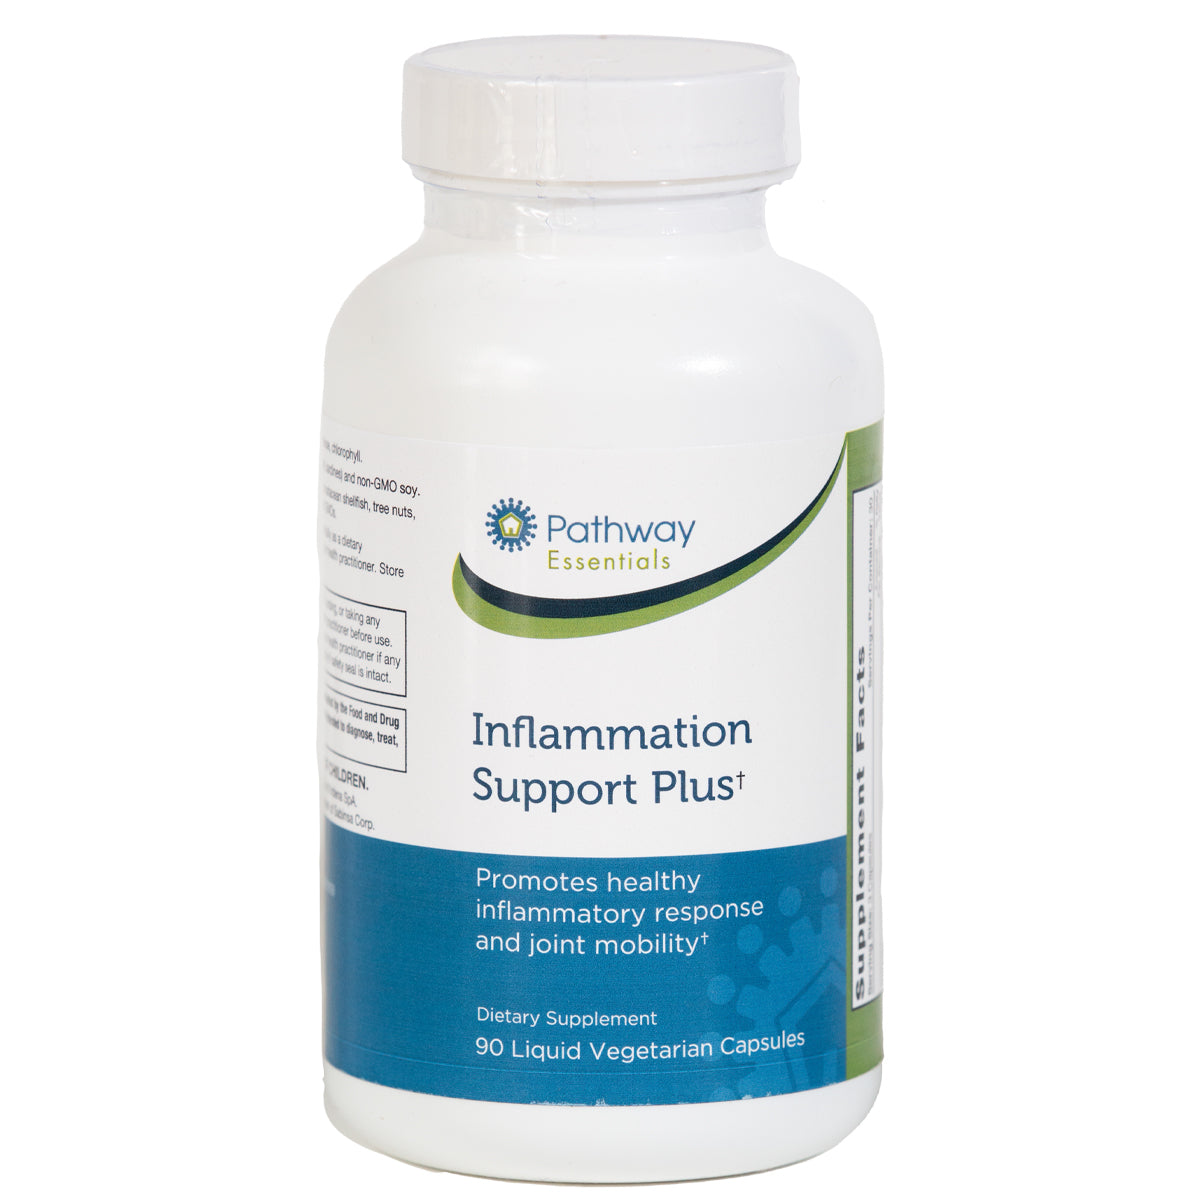 Inflammation Support Plus